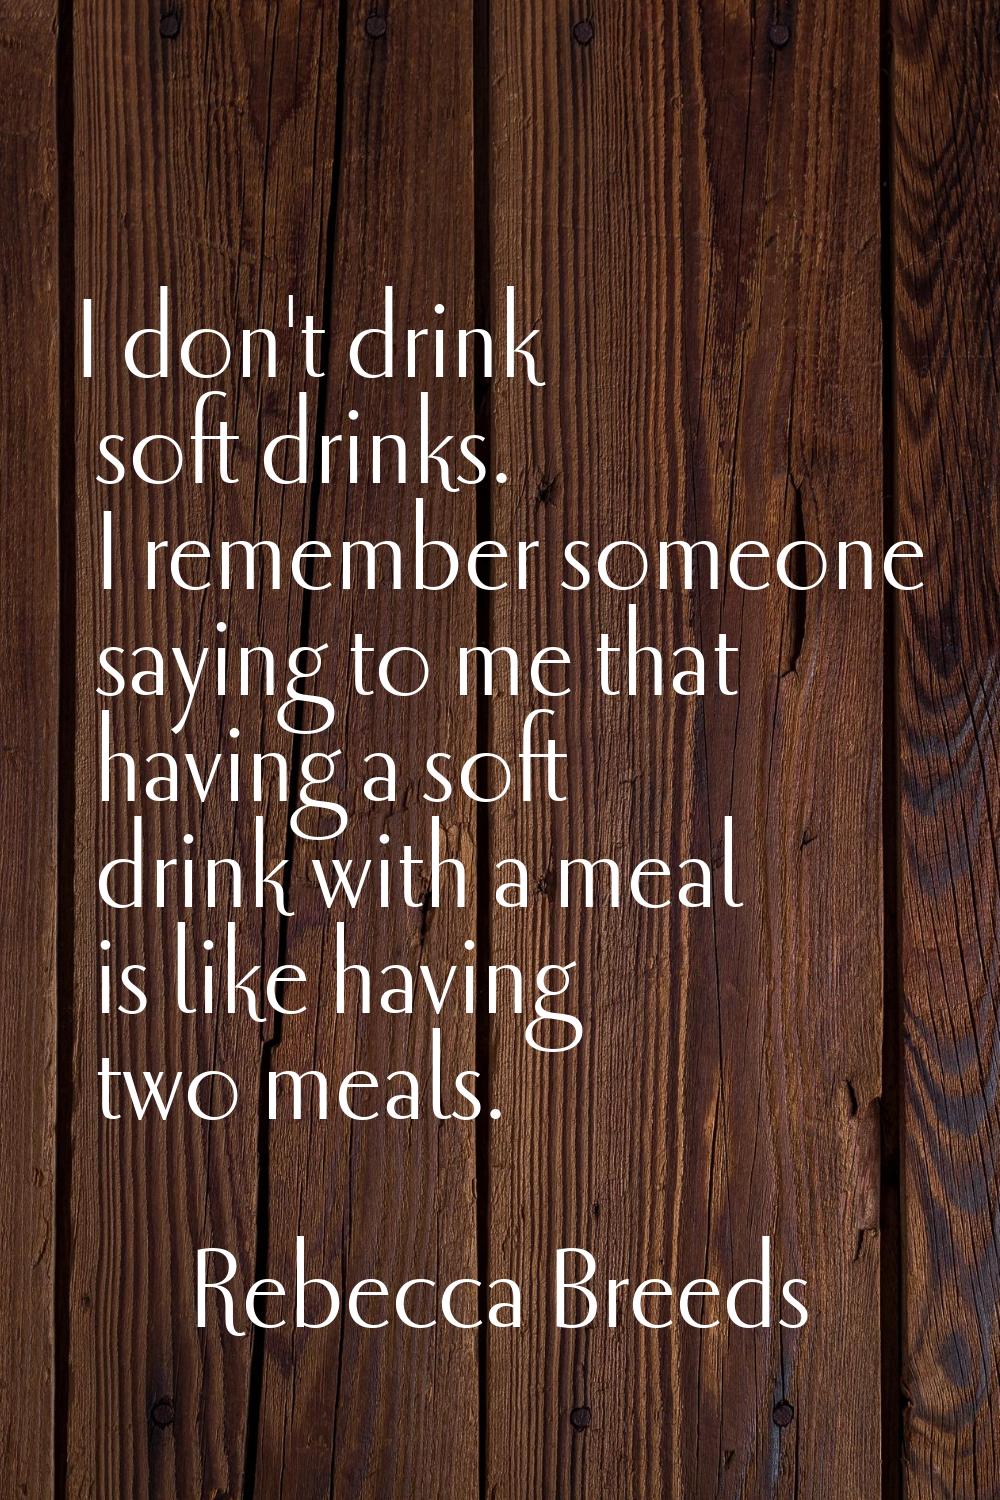 I don't drink soft drinks. I remember someone saying to me that having a soft drink with a meal is 